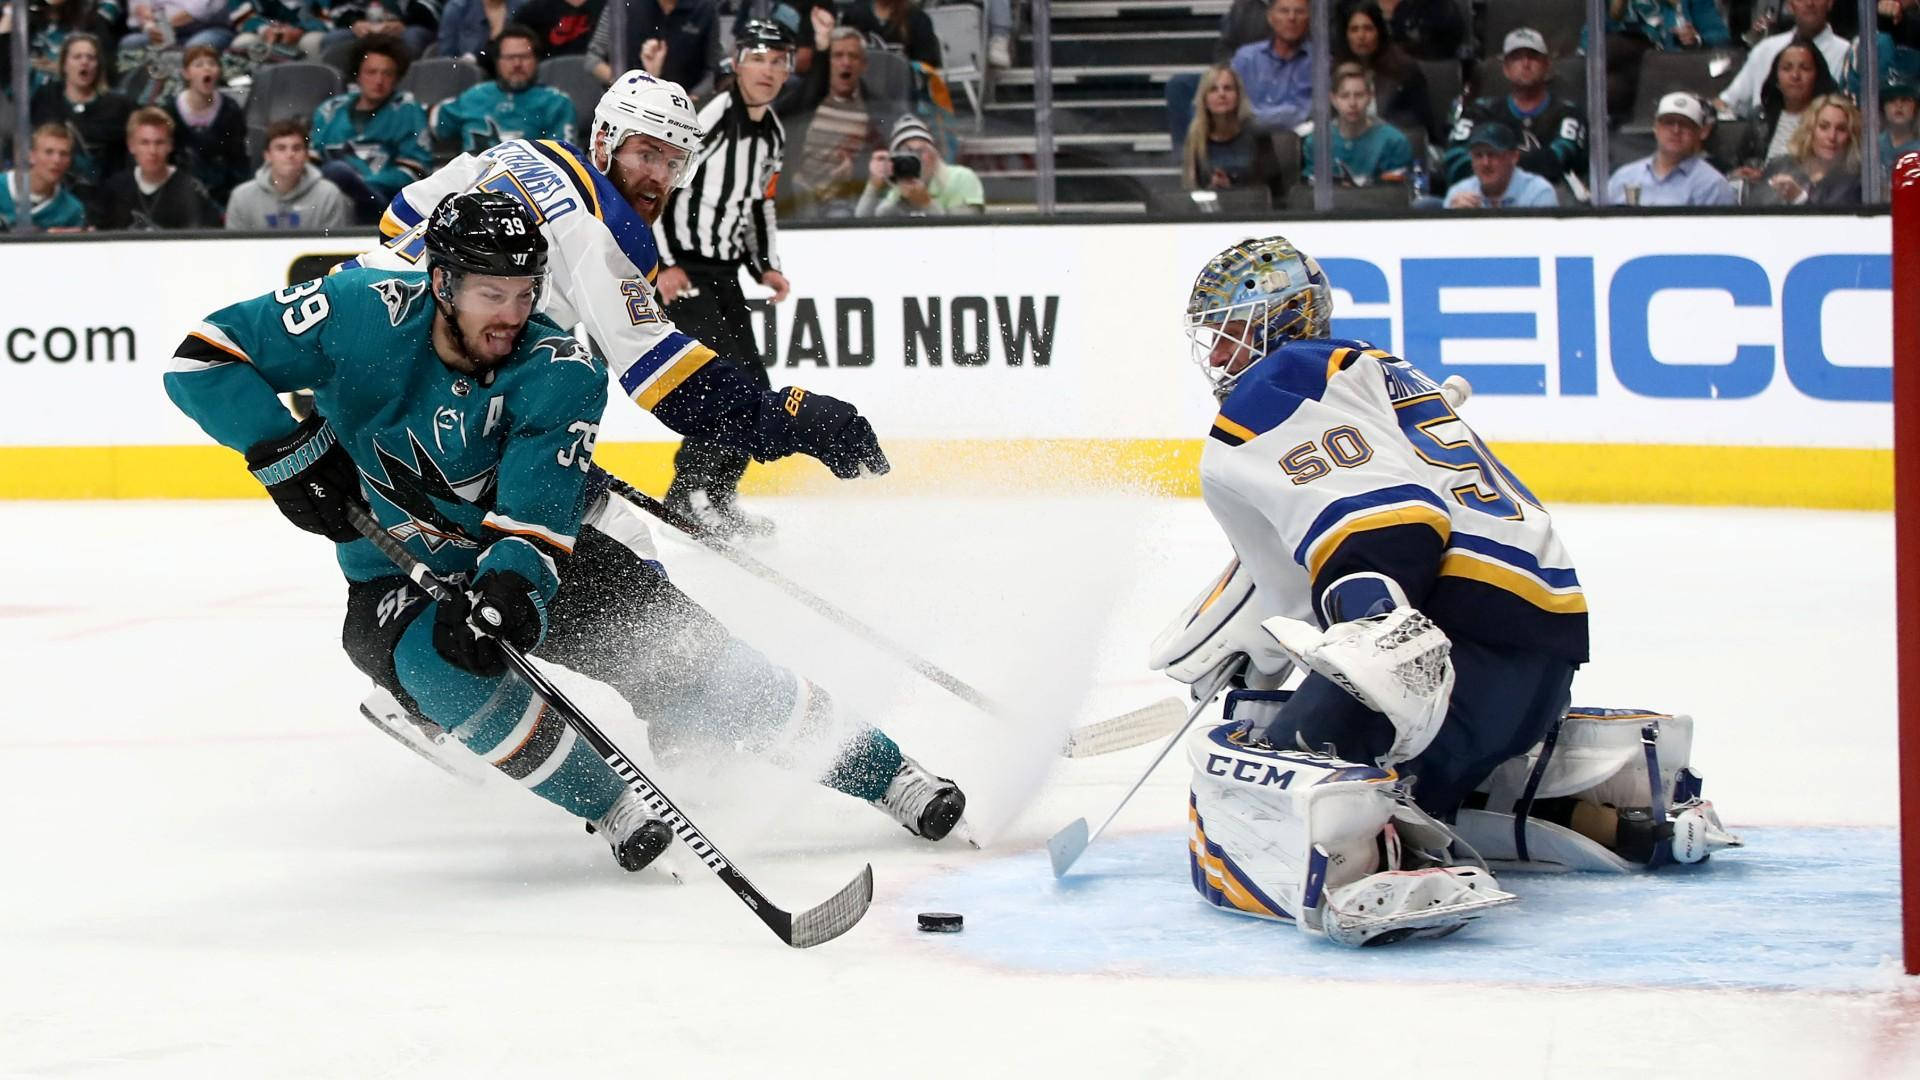 Ice Hockey Player Logan Couture Goal Against St. Louis Blues